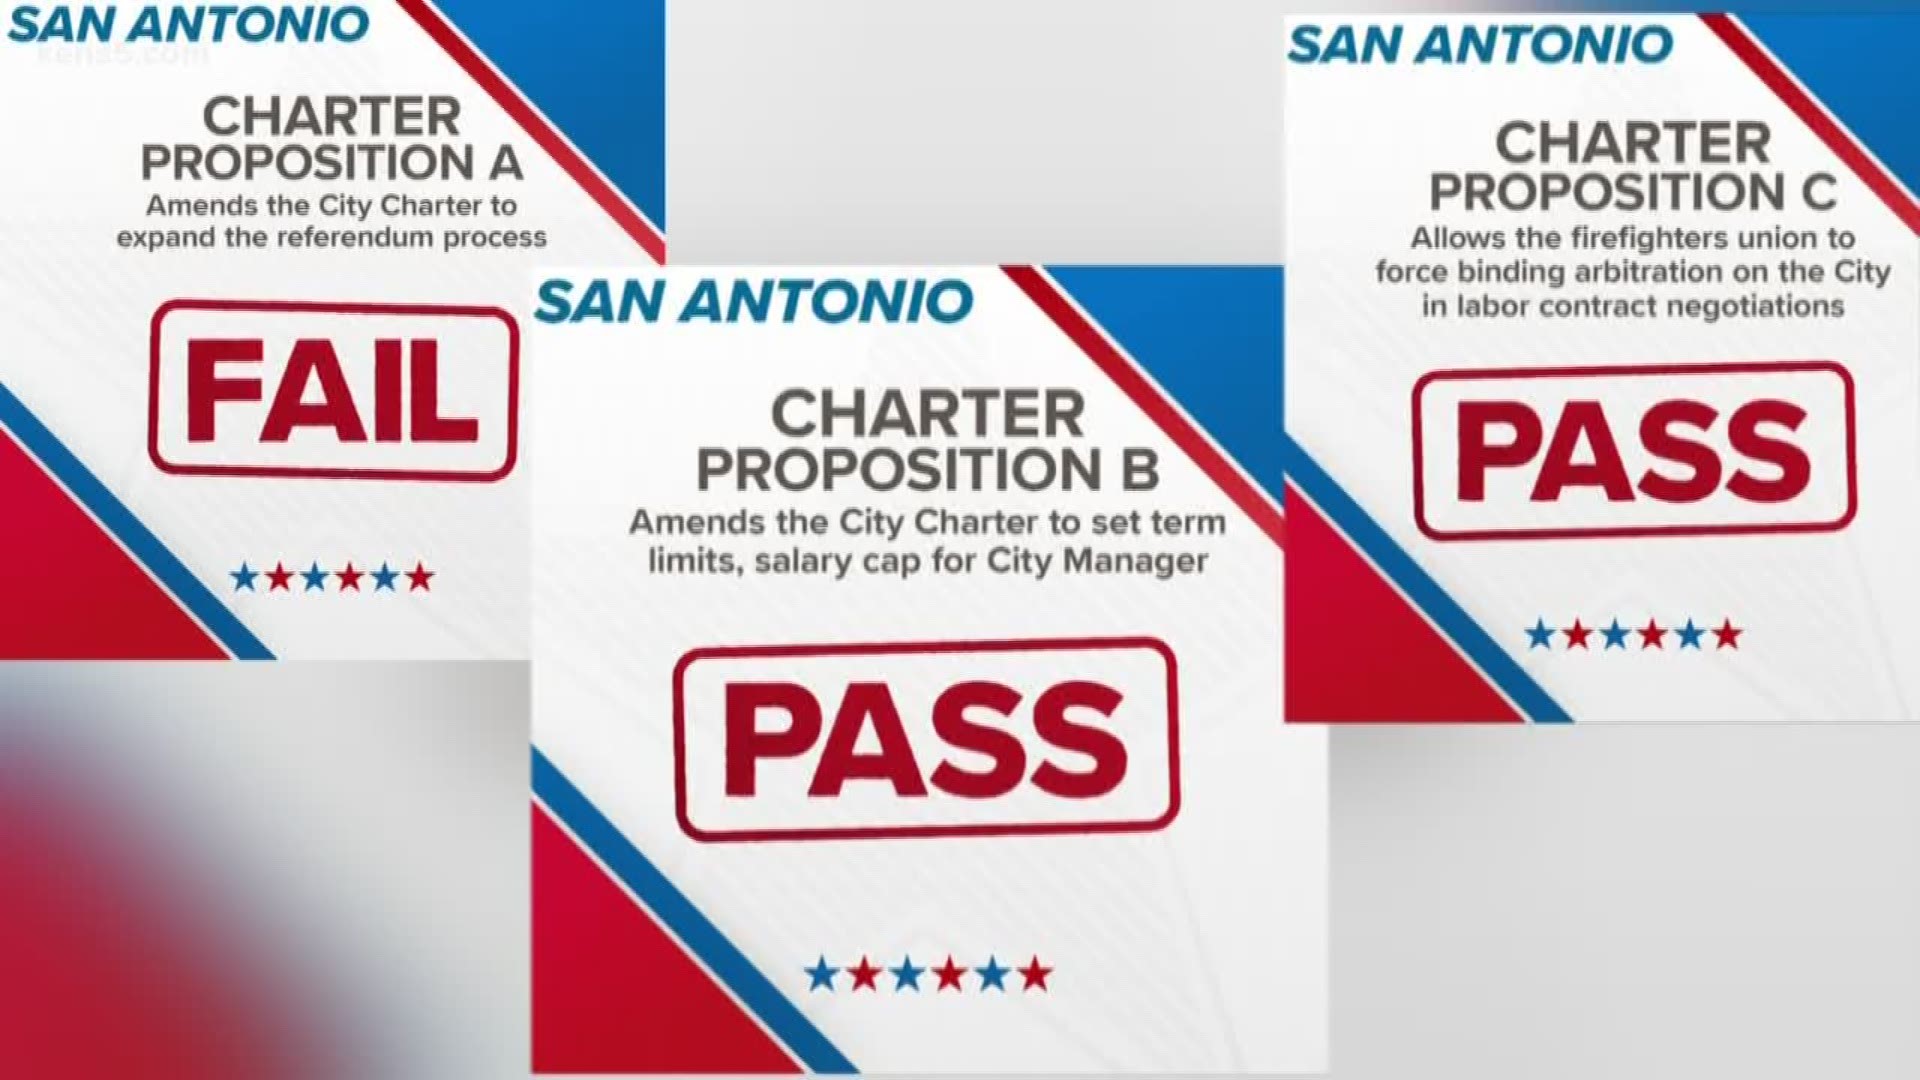 Voters have now weighed in on the battle between city leaders and the San Antonio Professional Firefighters Association. Eyewitness News reporter Adi Guajardo has more.